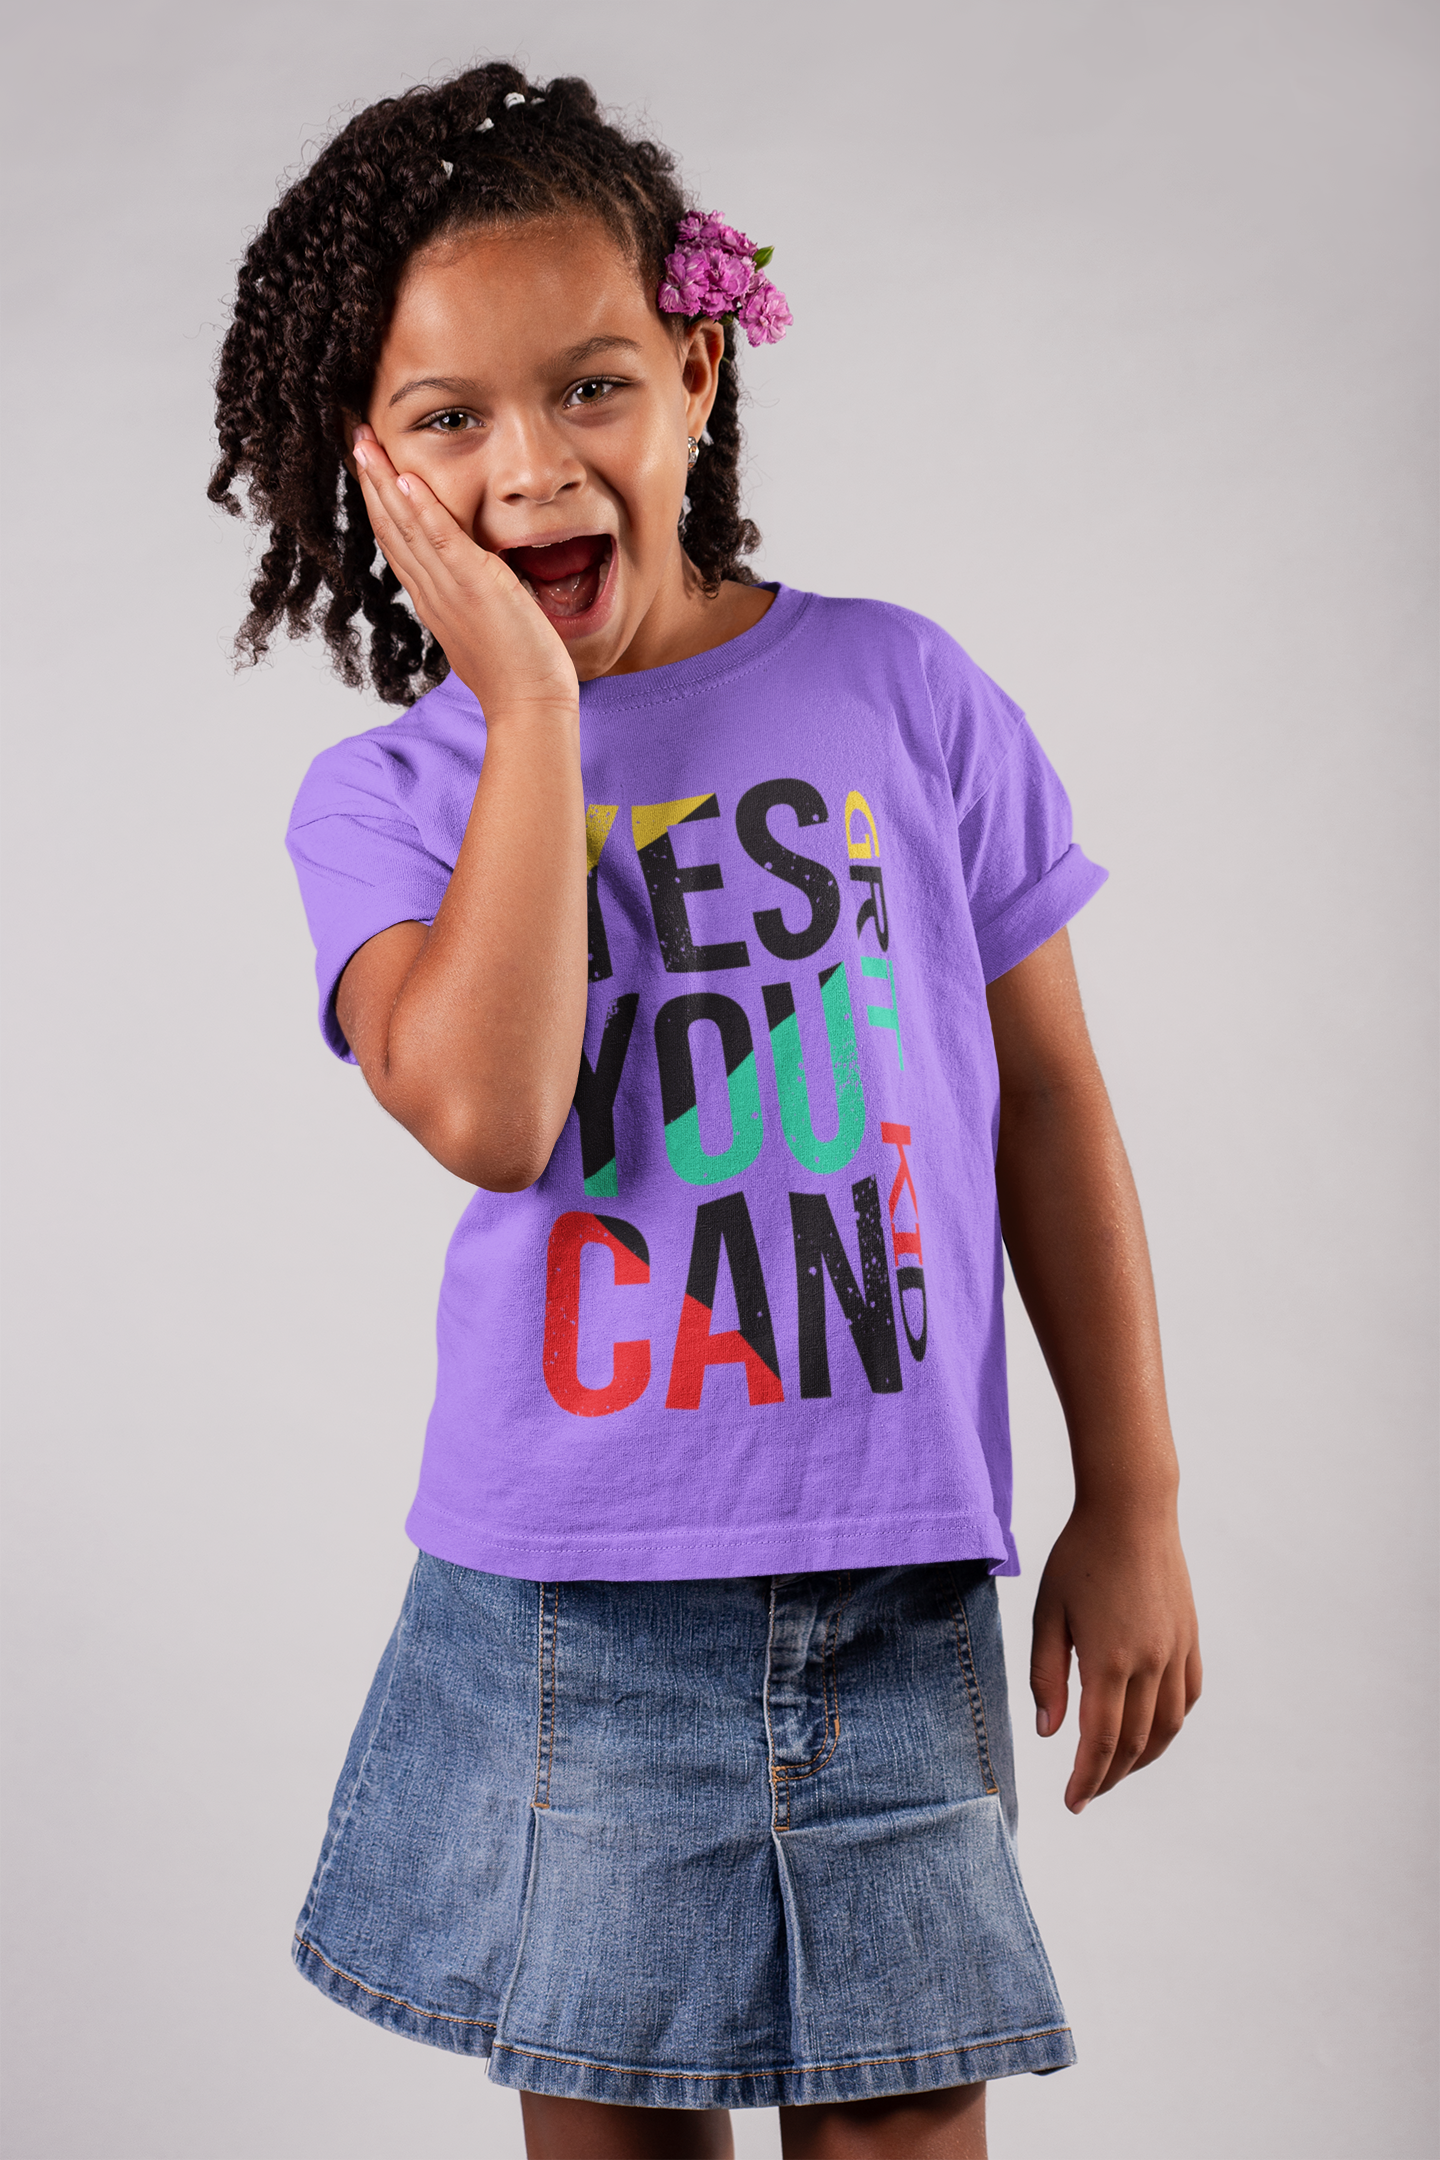 YES YOU CAN - Girls Princess Tee